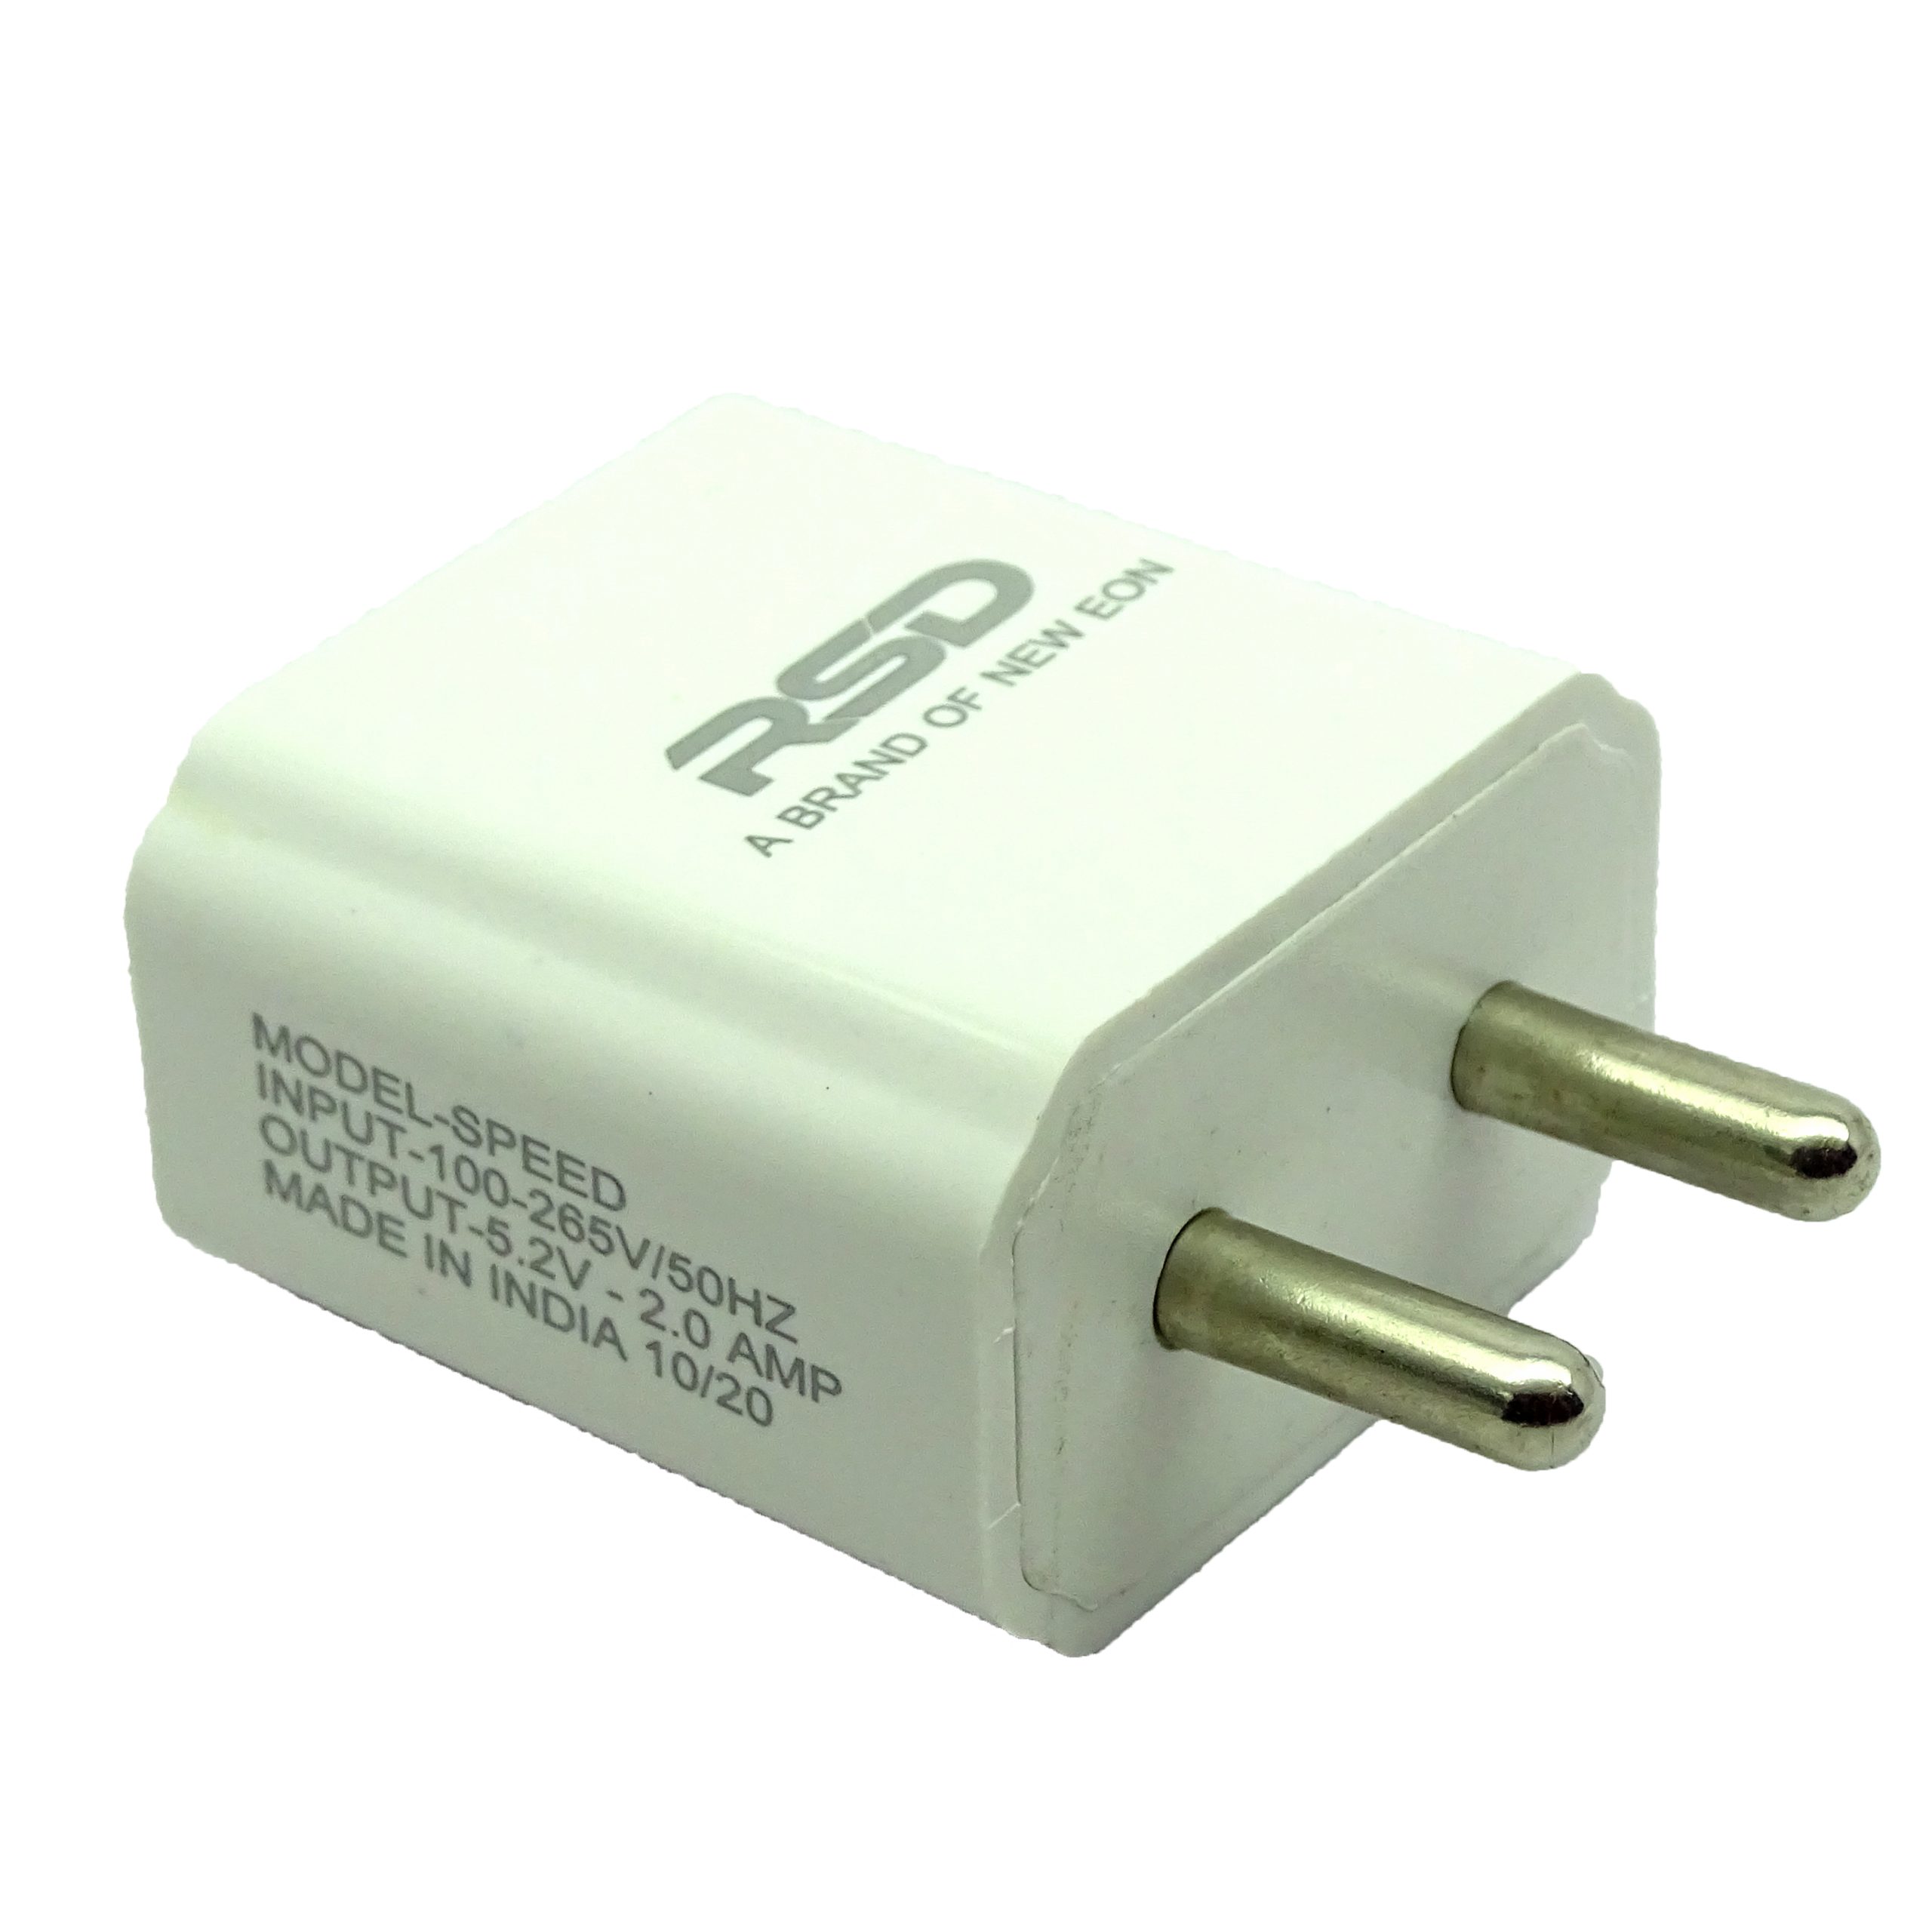 rsd fast charger quick charger 3 amp charger adaptor usb bahubali top